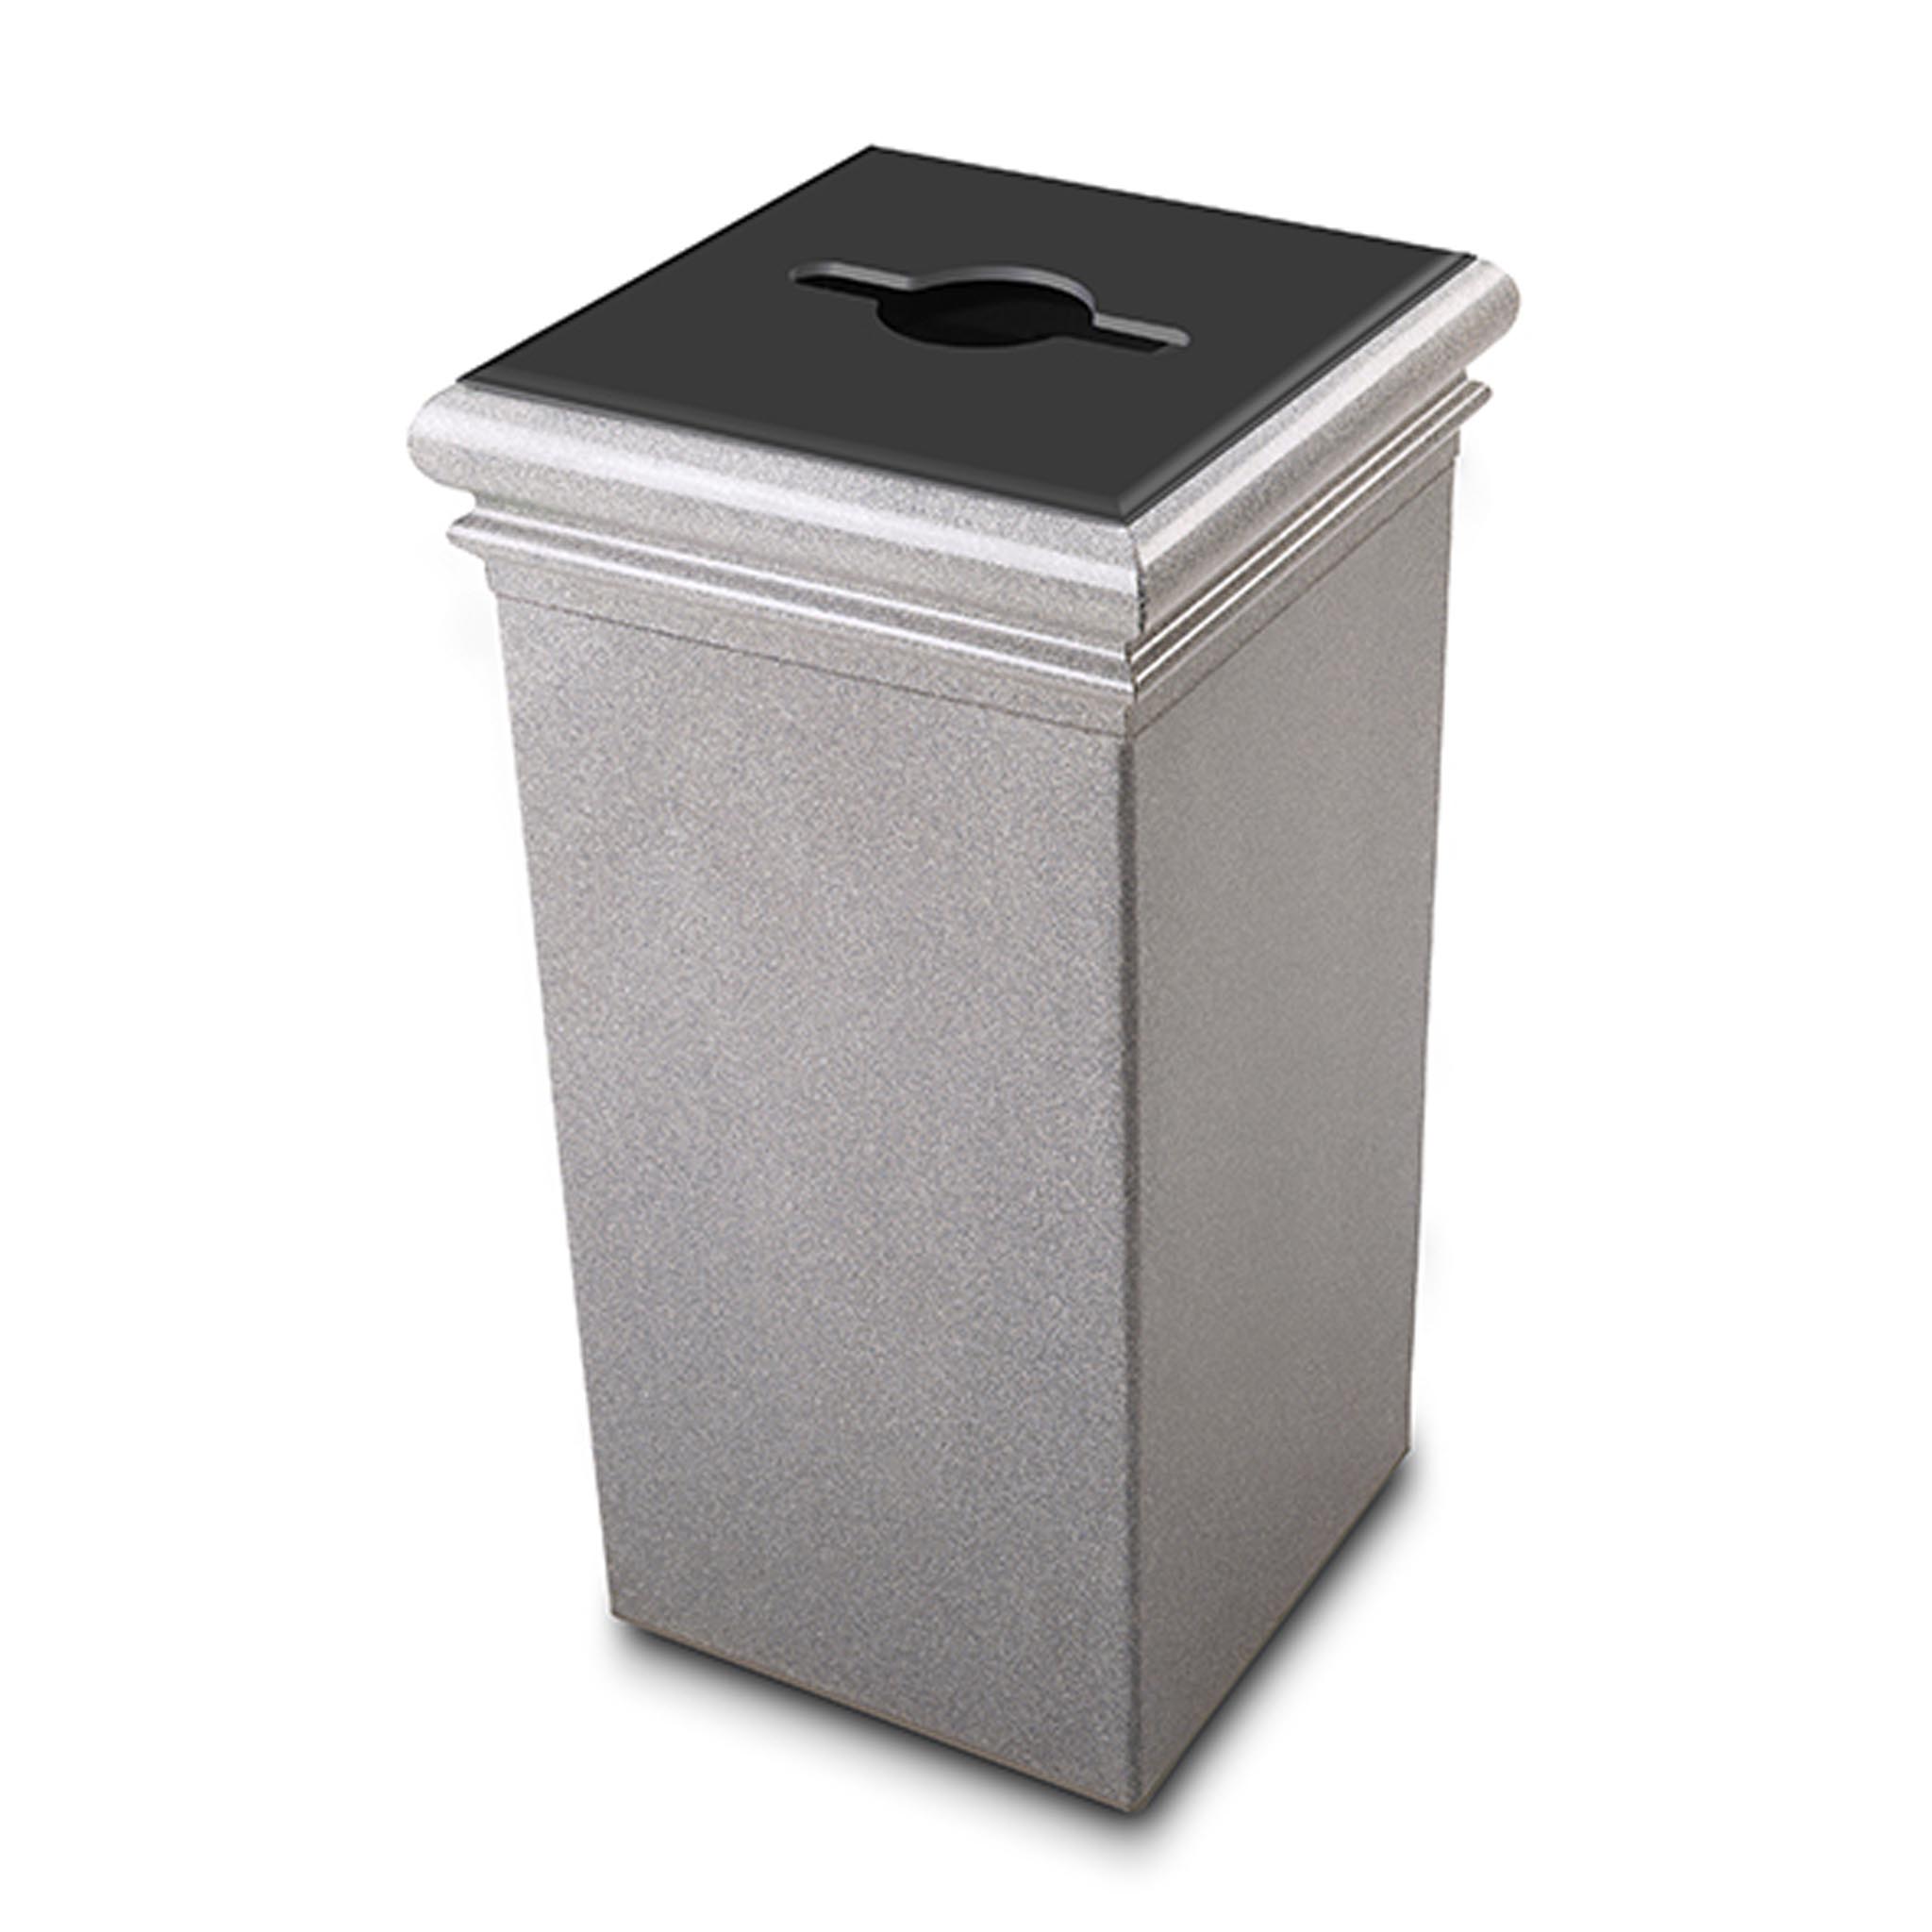 30 Gallon Stainless Steel Outdoor Trash Can, Open Top Garbage Can